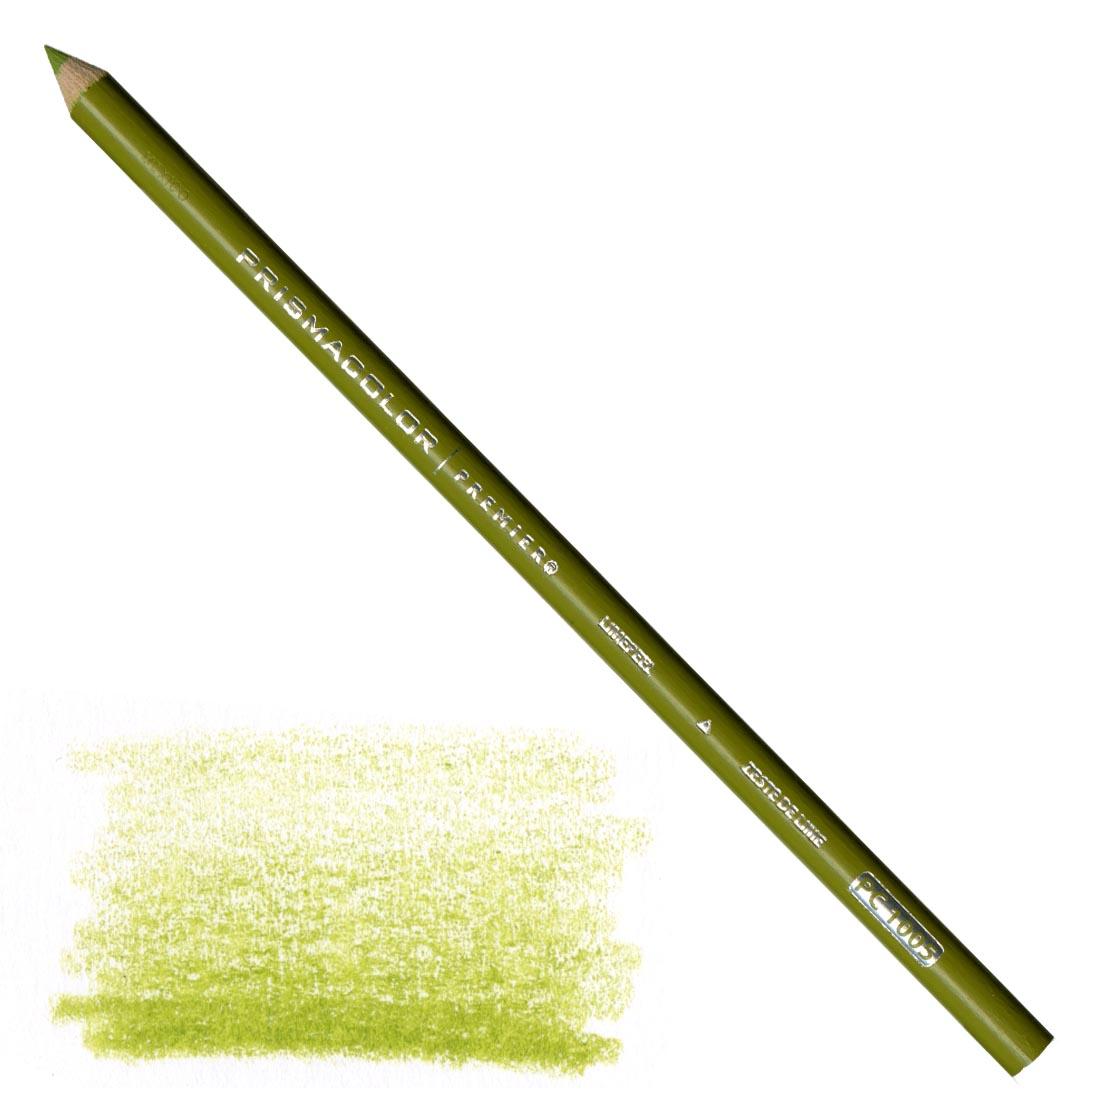 Limepeel Prismacolor Premier Colored Pencil with a sample colored swatch